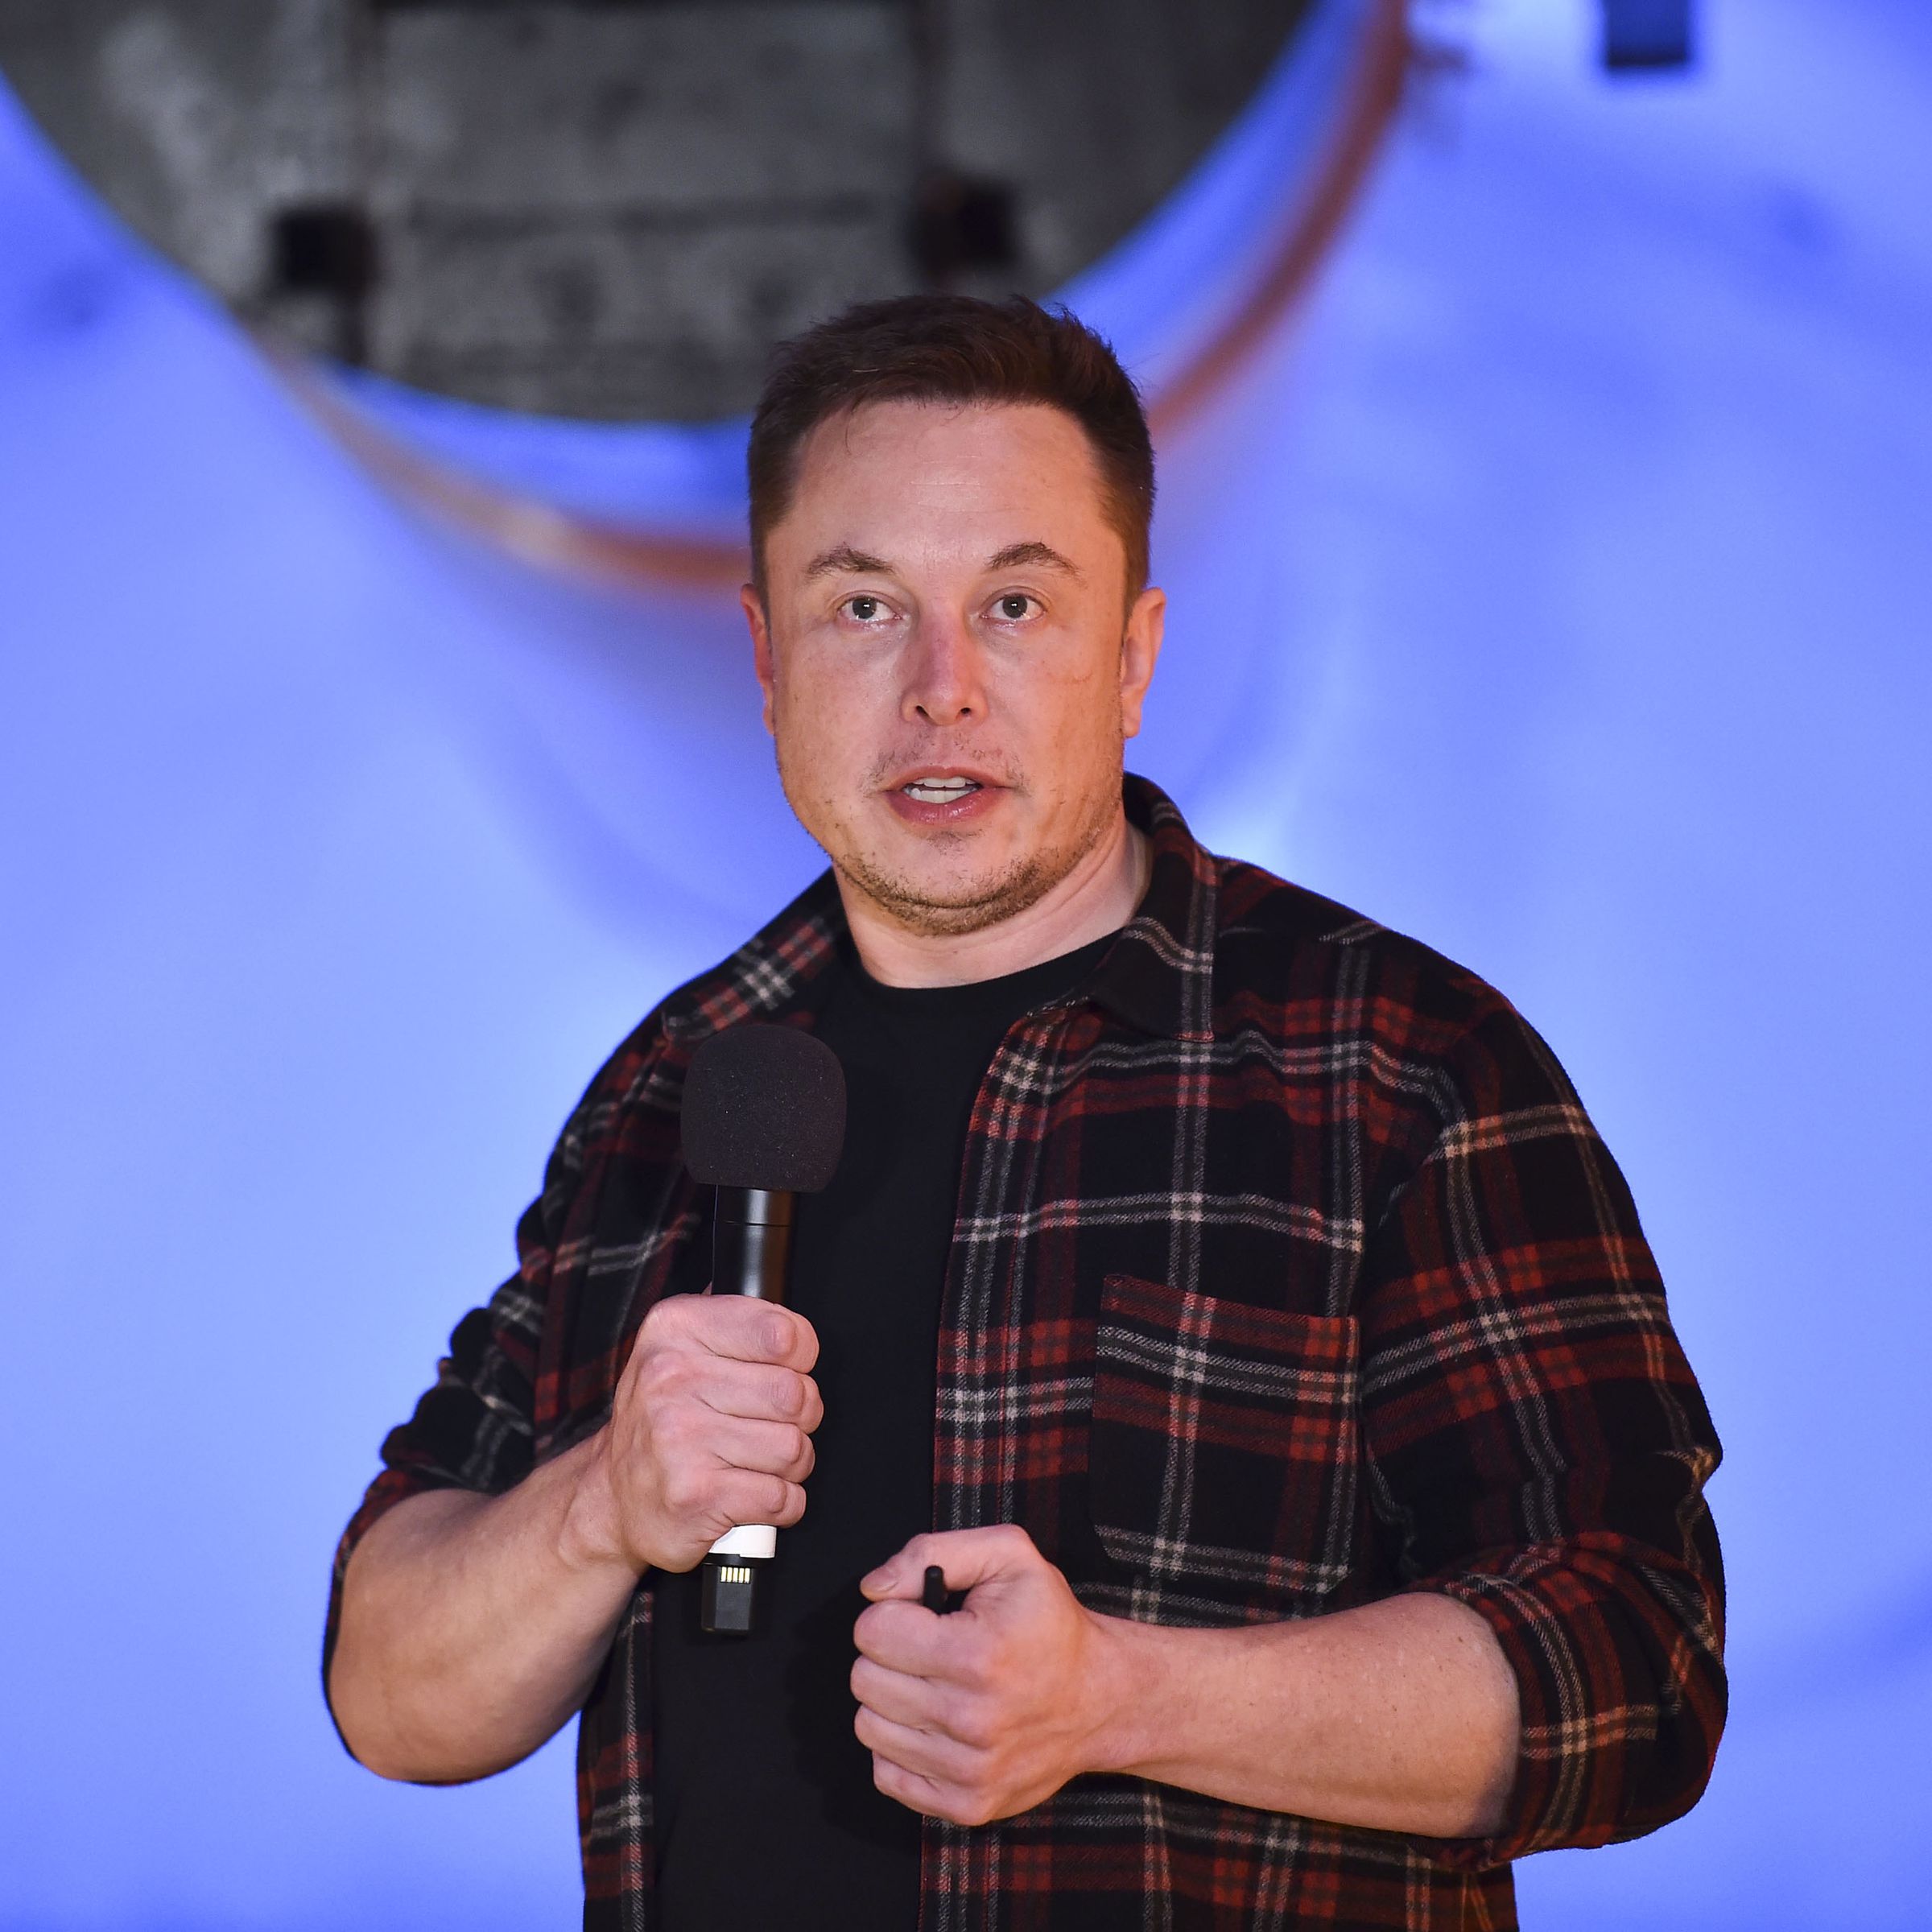 US-SCIENCE-TECHNOLOGY-COMPUTERS-TRANSPORT-TUNNEL-BORING-MUSK